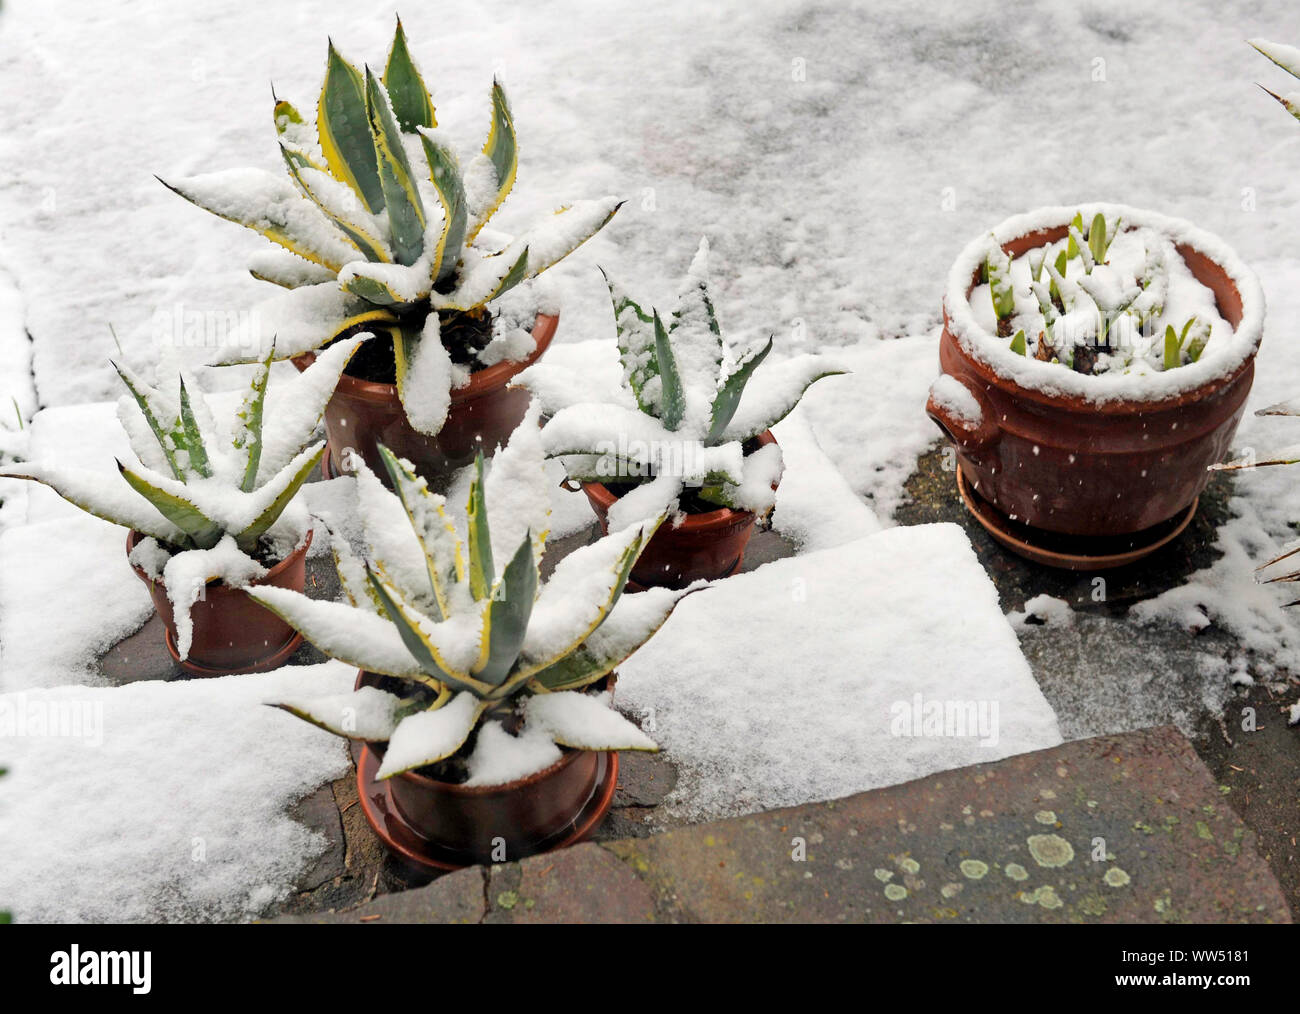 Fresh snowfall in postwinter covering the potted plants on the garden terrace Stock Photo